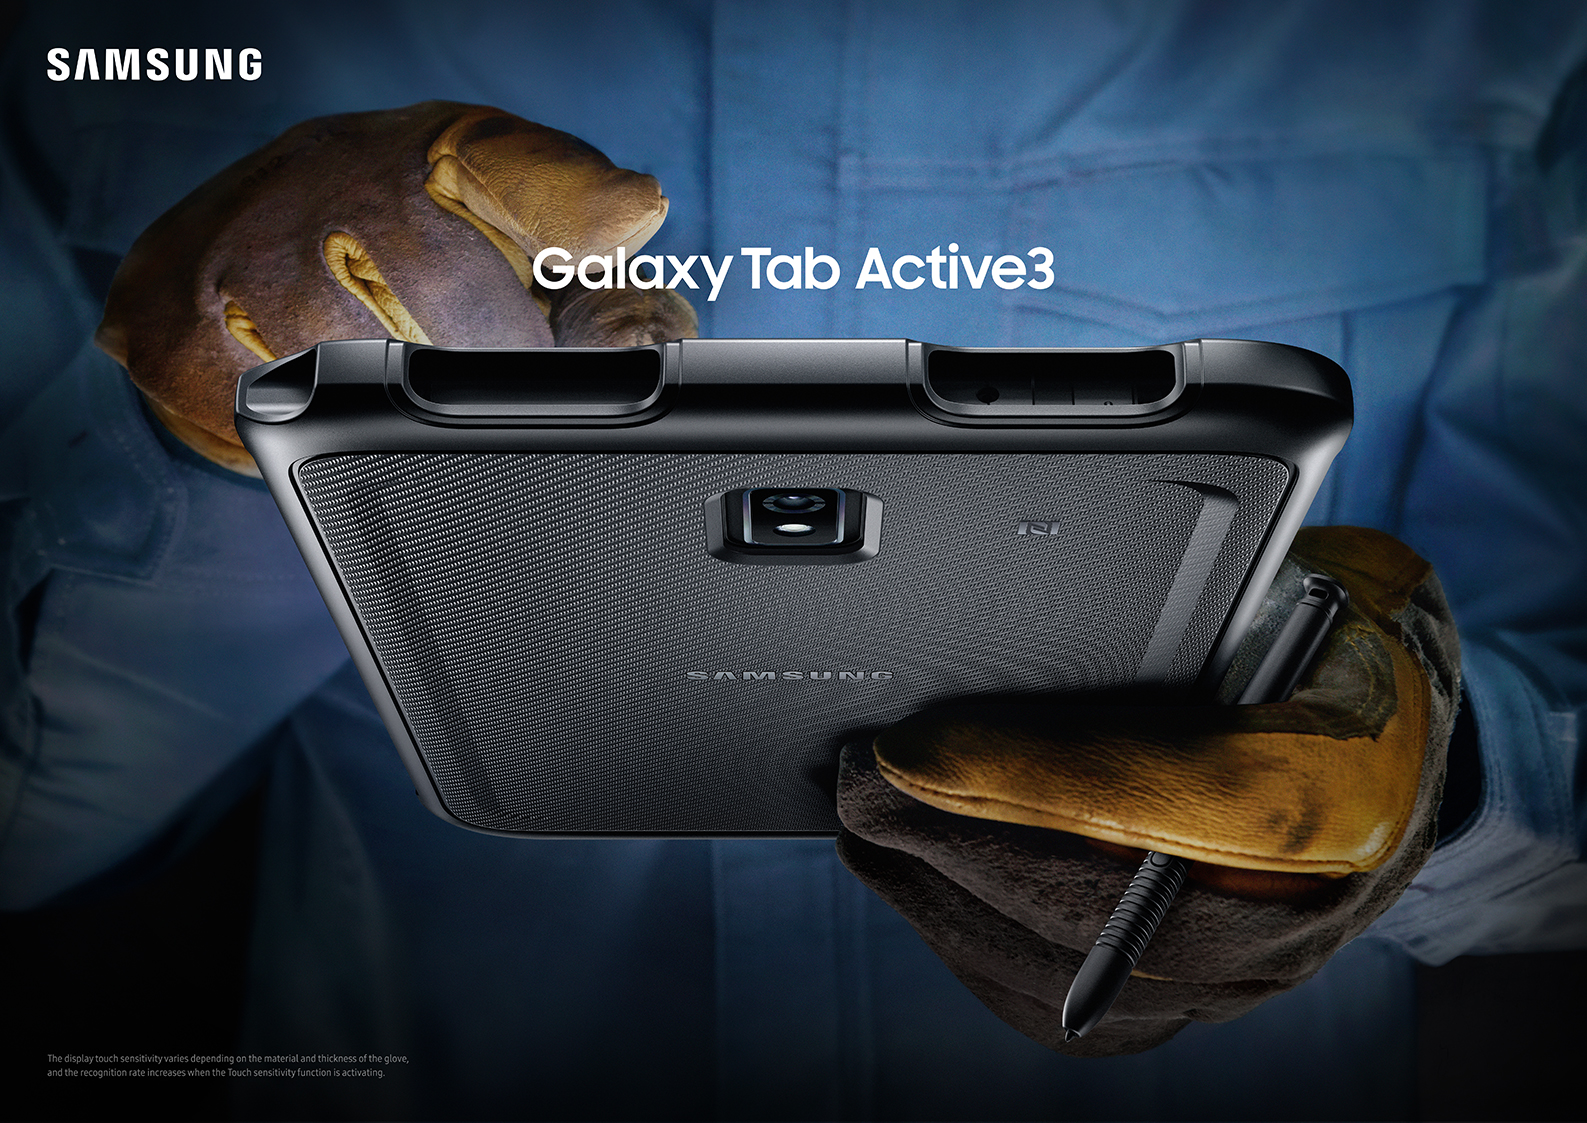 A pair of hands in work gloves hold up the ruggedly built Galaxy Tab Active3.